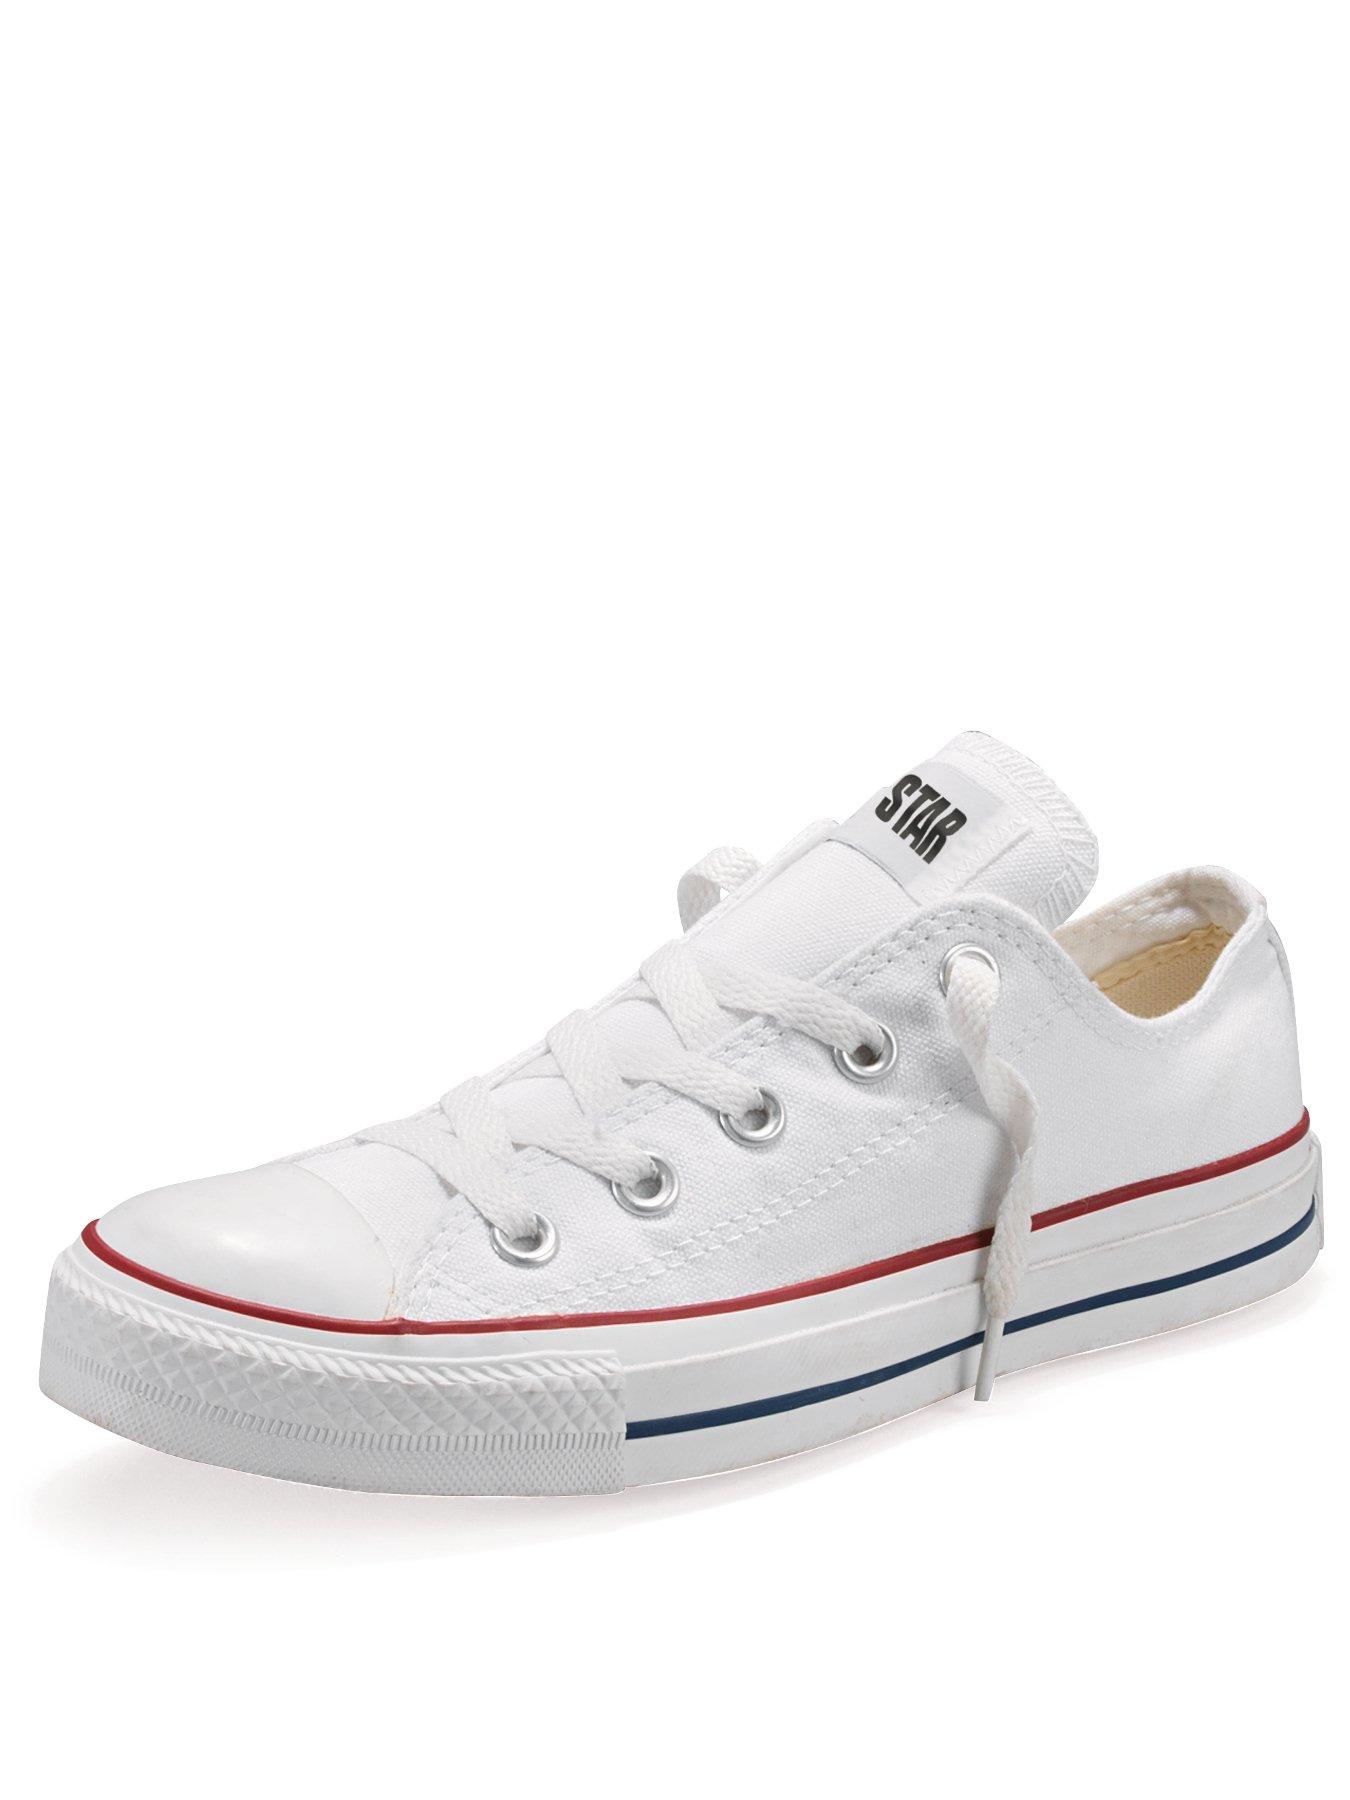 childrens converse velcro trainers